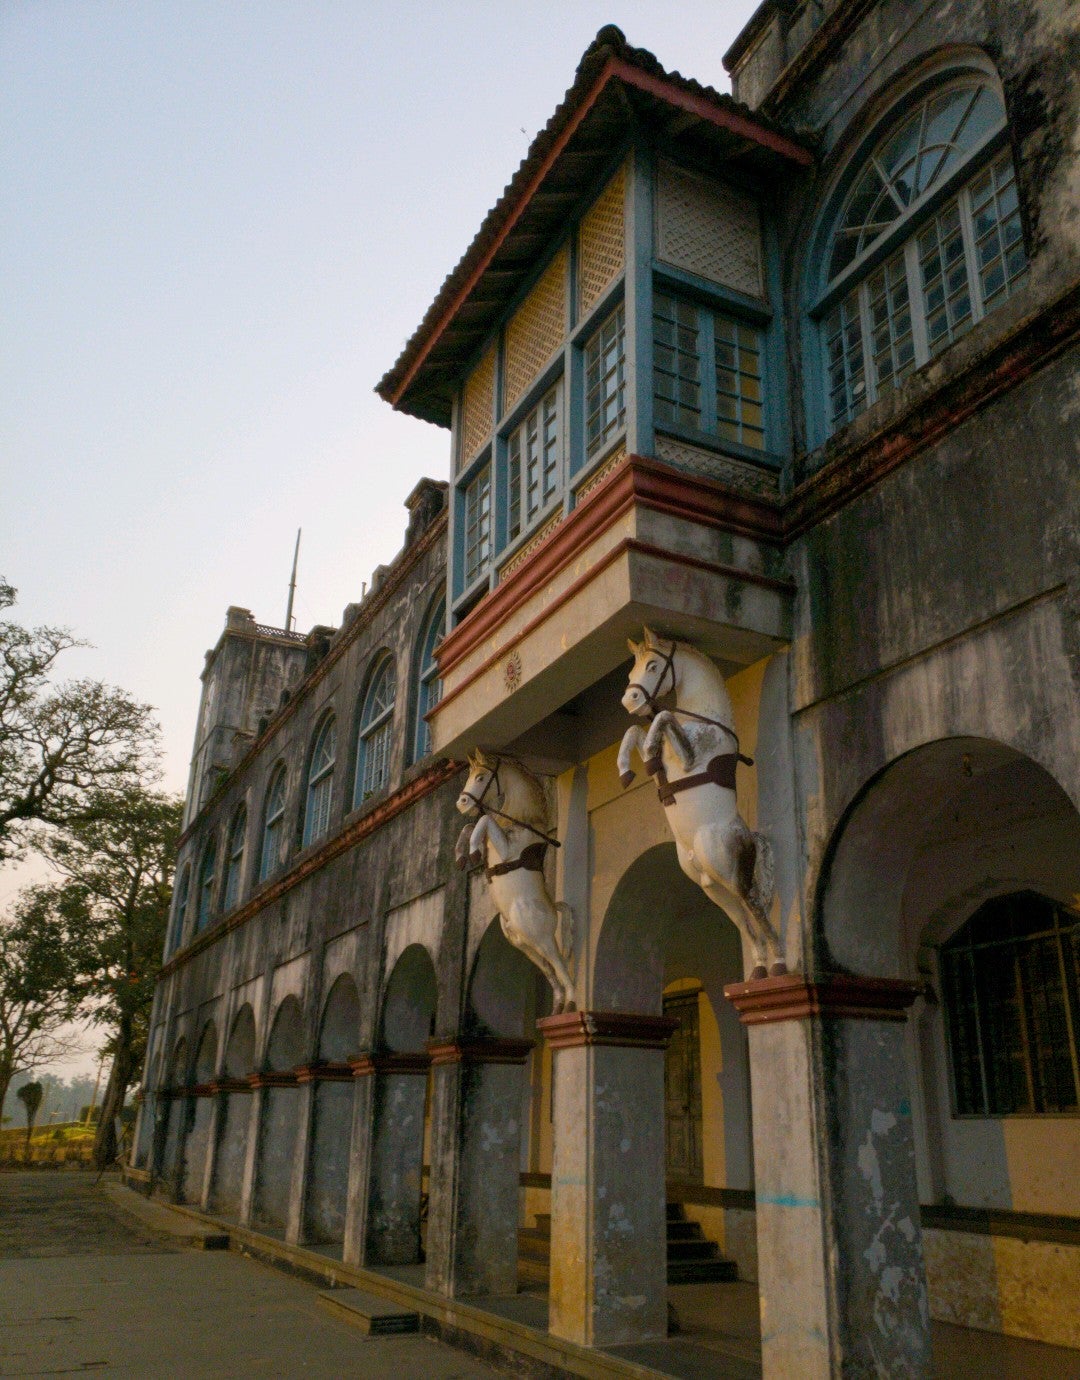 The Fort Mercara Hotel